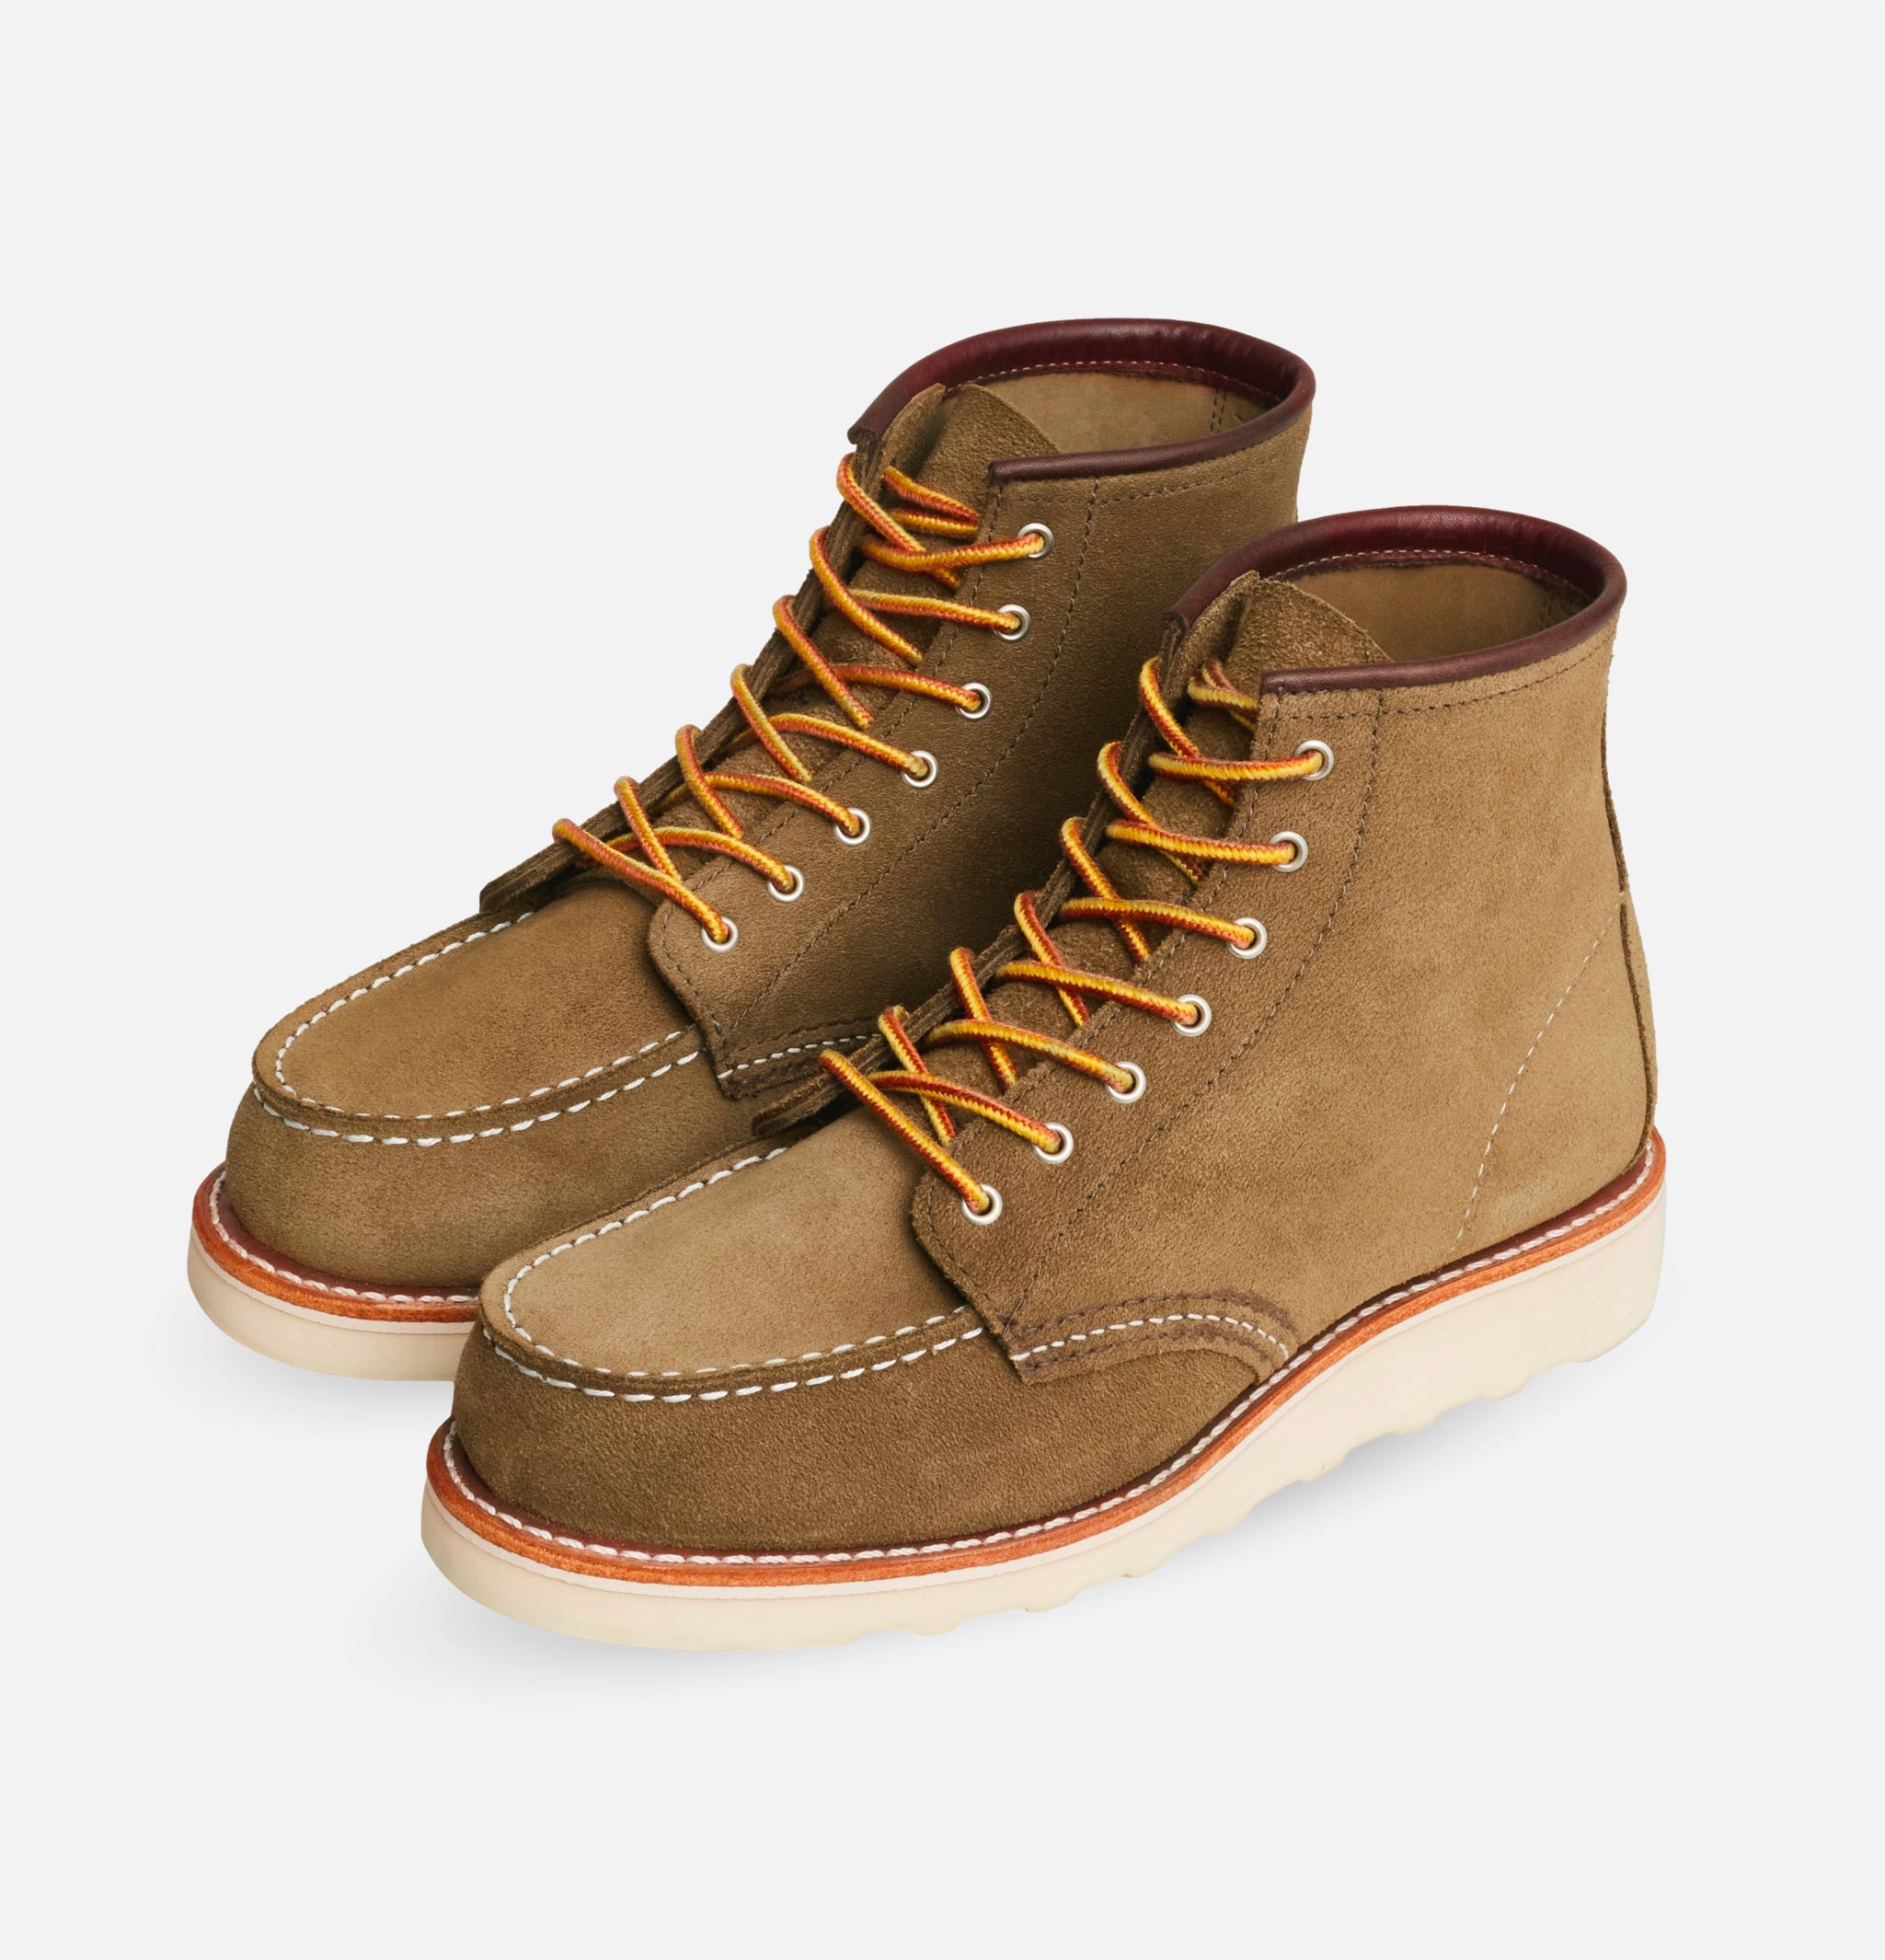 Red Wing Shoes Woman - 3377 - Moc Toe Olive